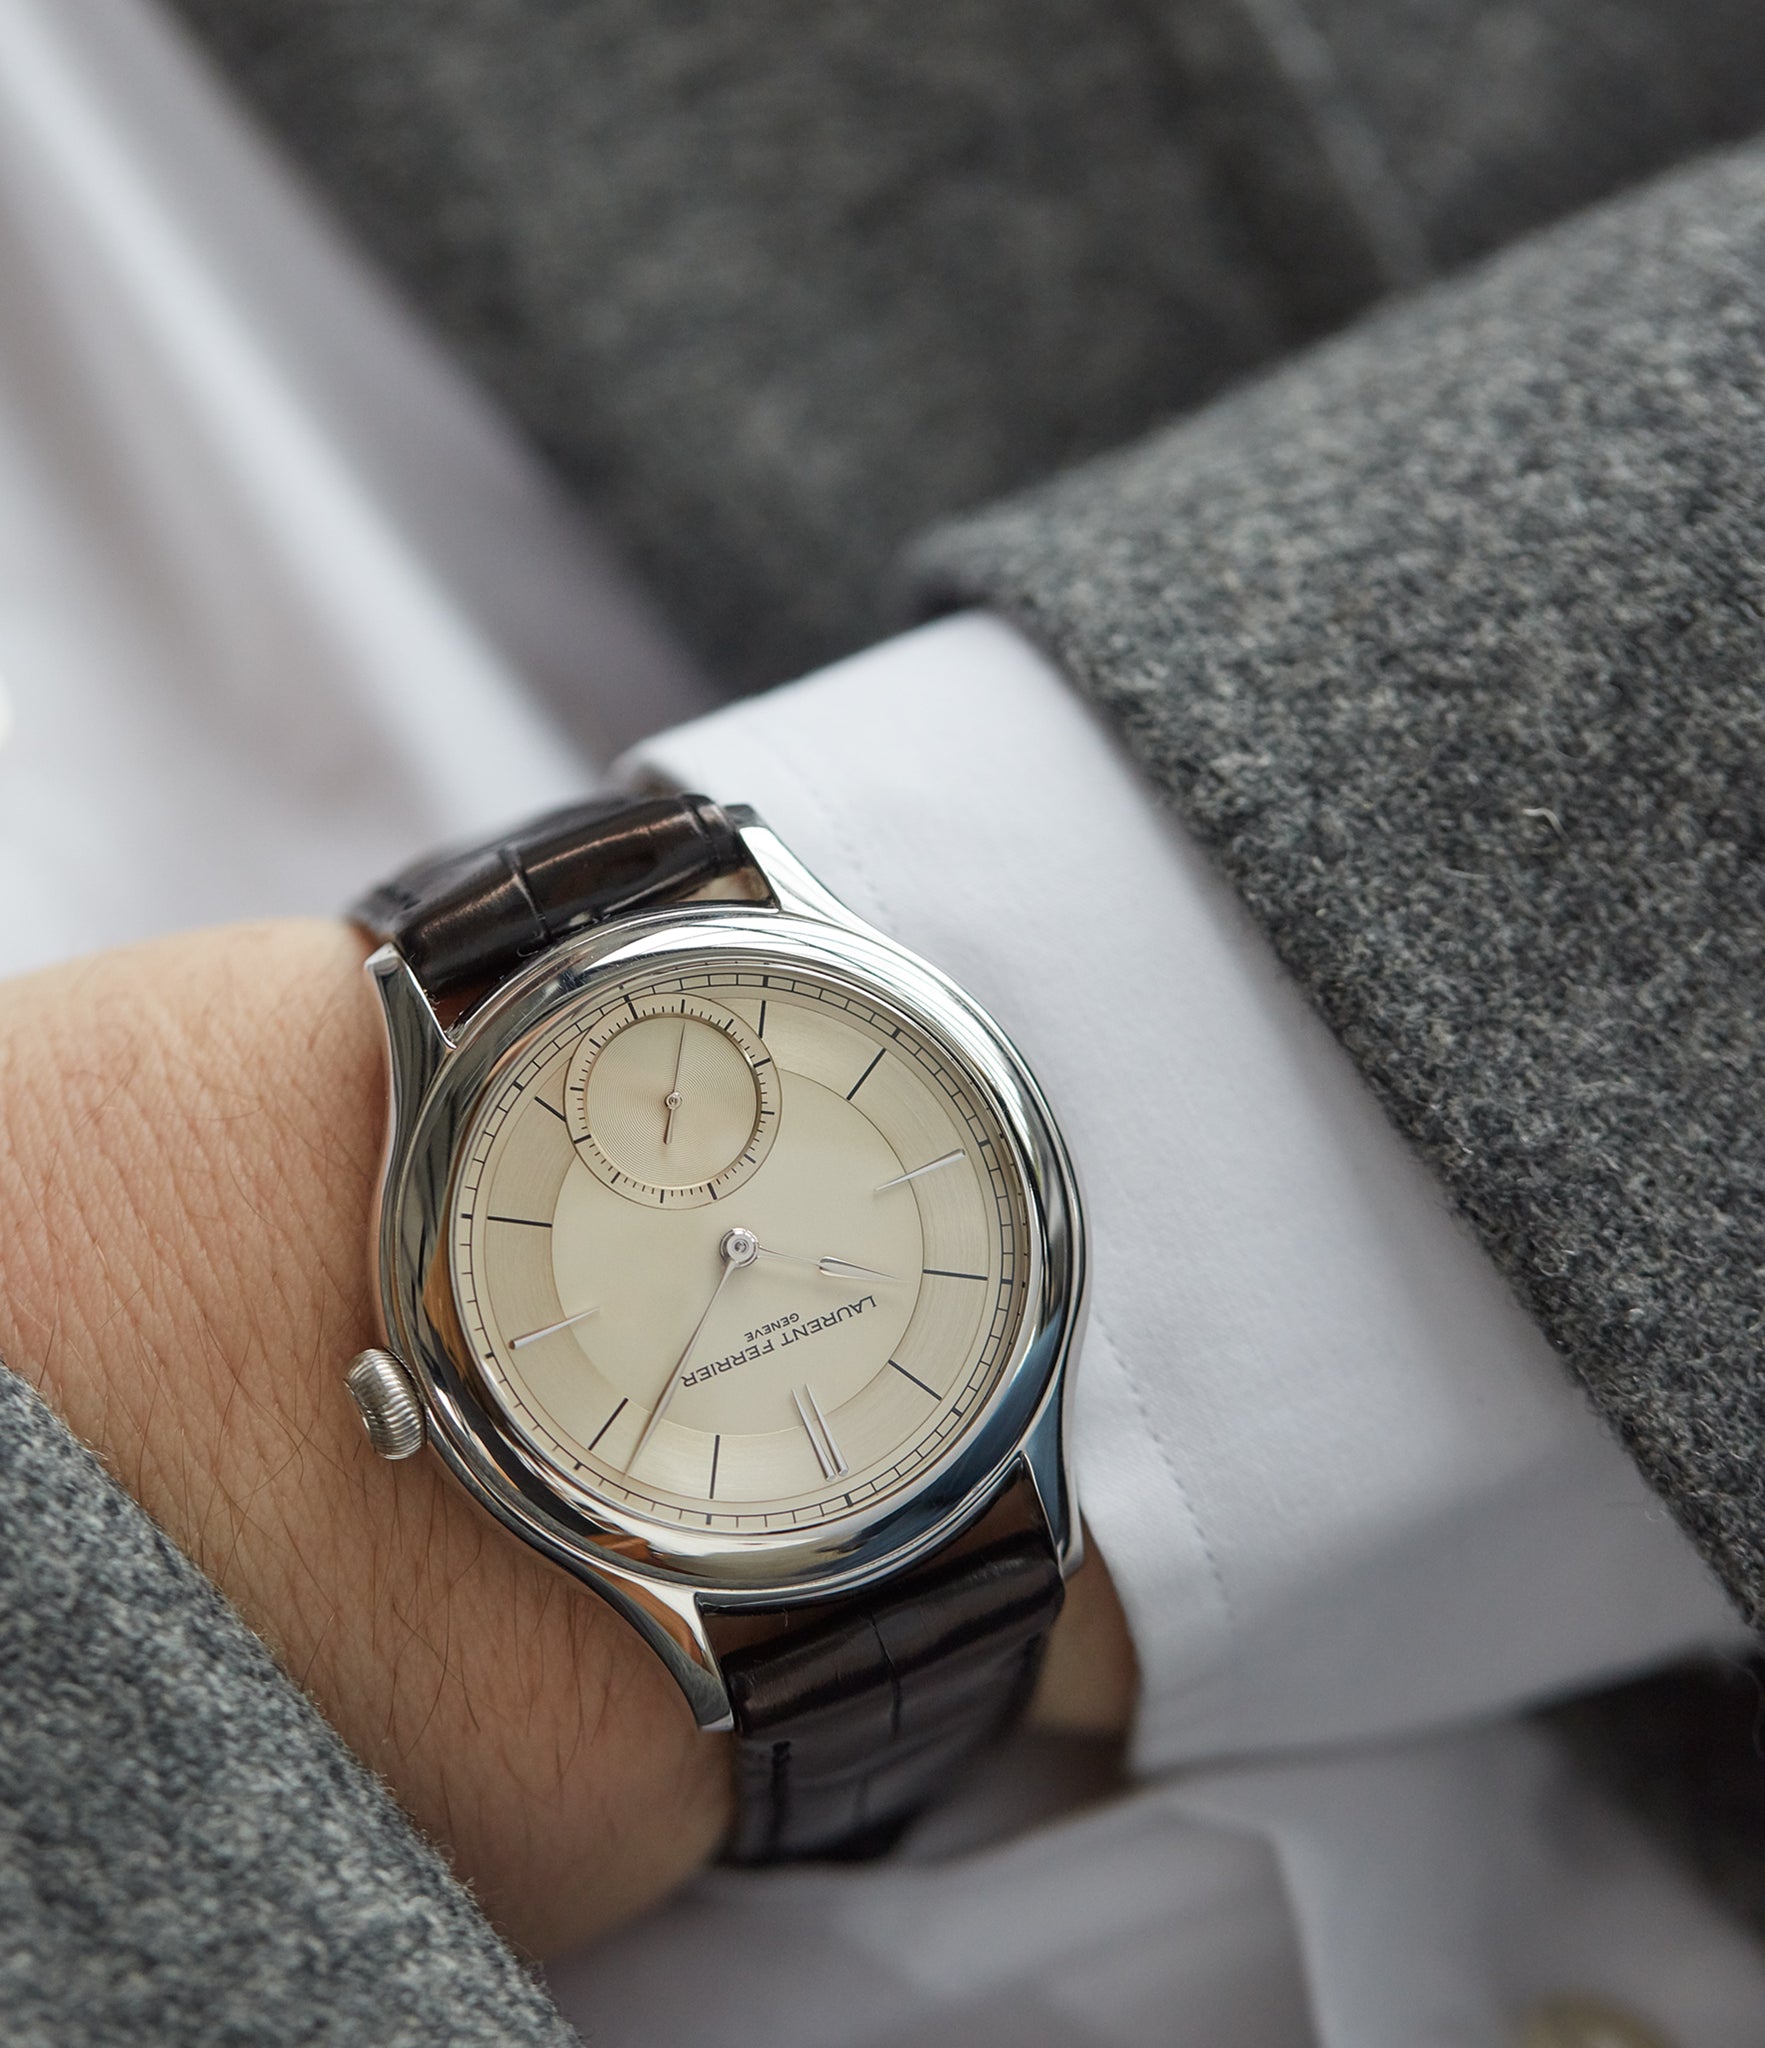 men's classic wristwatch Laurent Ferrier Galet Micro-rotor 40 mm platinum time-only dress watch from independent watchmaker for sale online at A Collected Man London UK specialist of rare watches